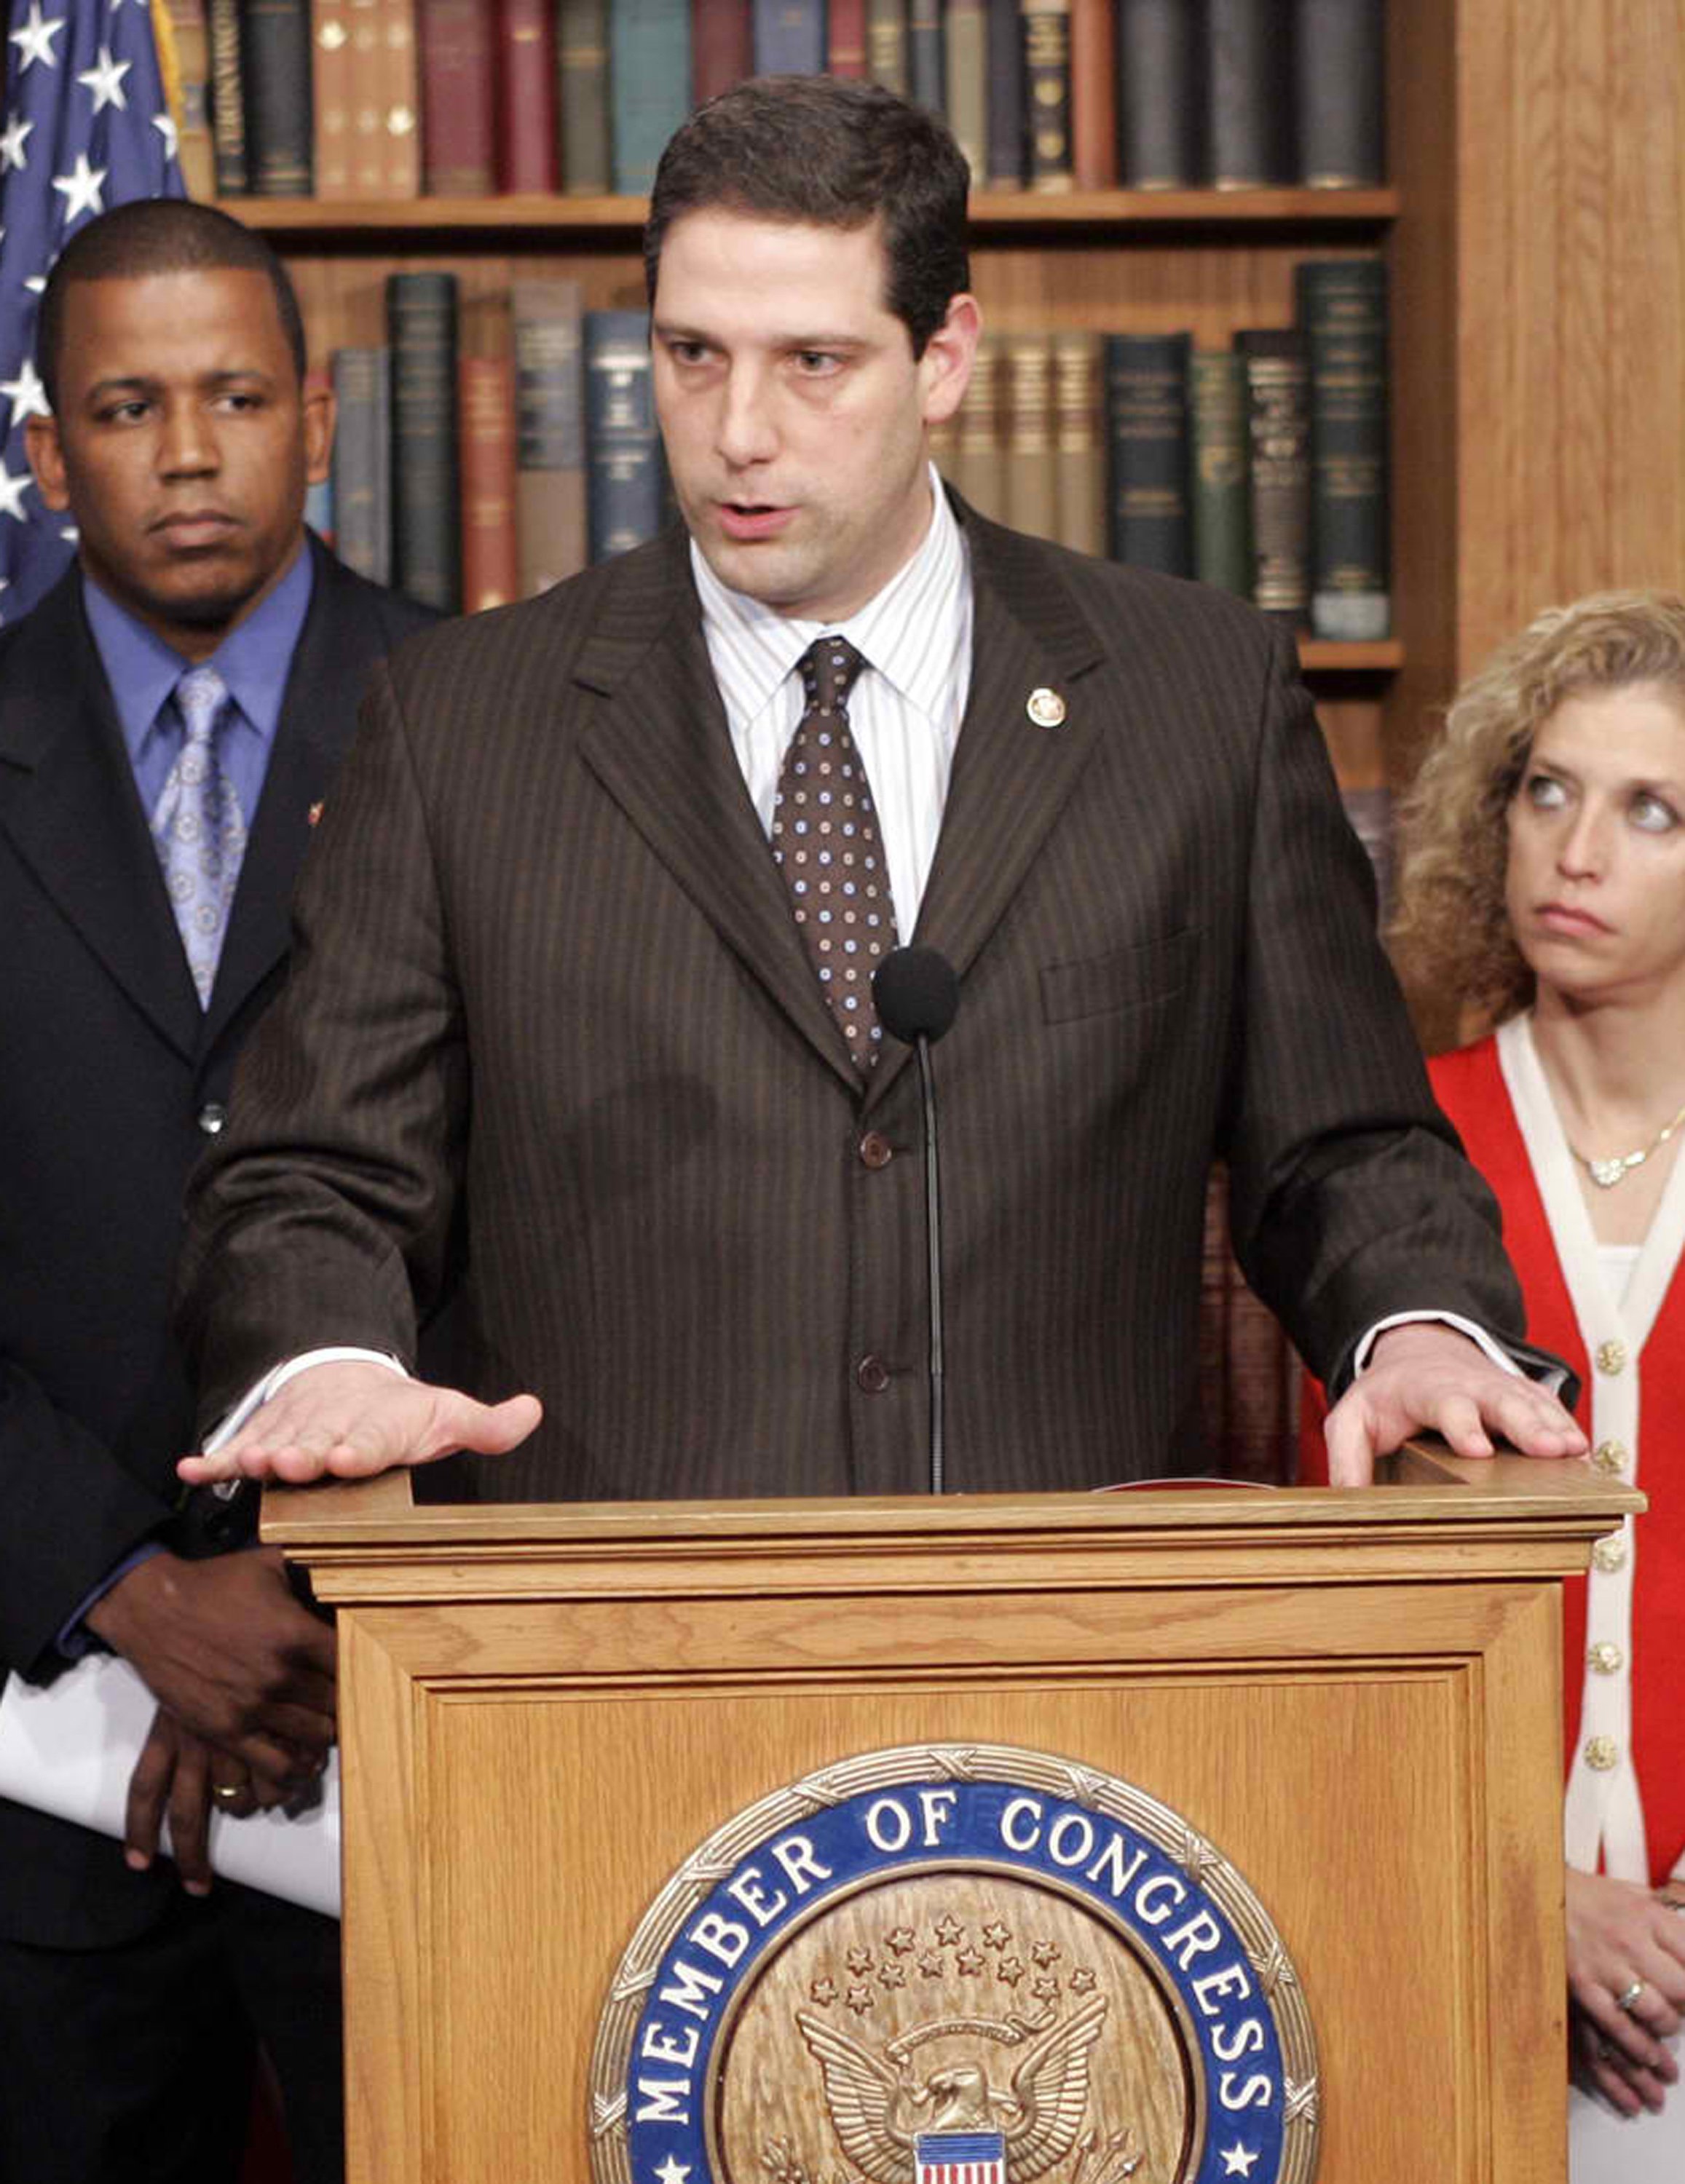 Rep. Tim Ryan, D-Ohio, speaks at a news conference in Washington on Feb. 14, 2007.